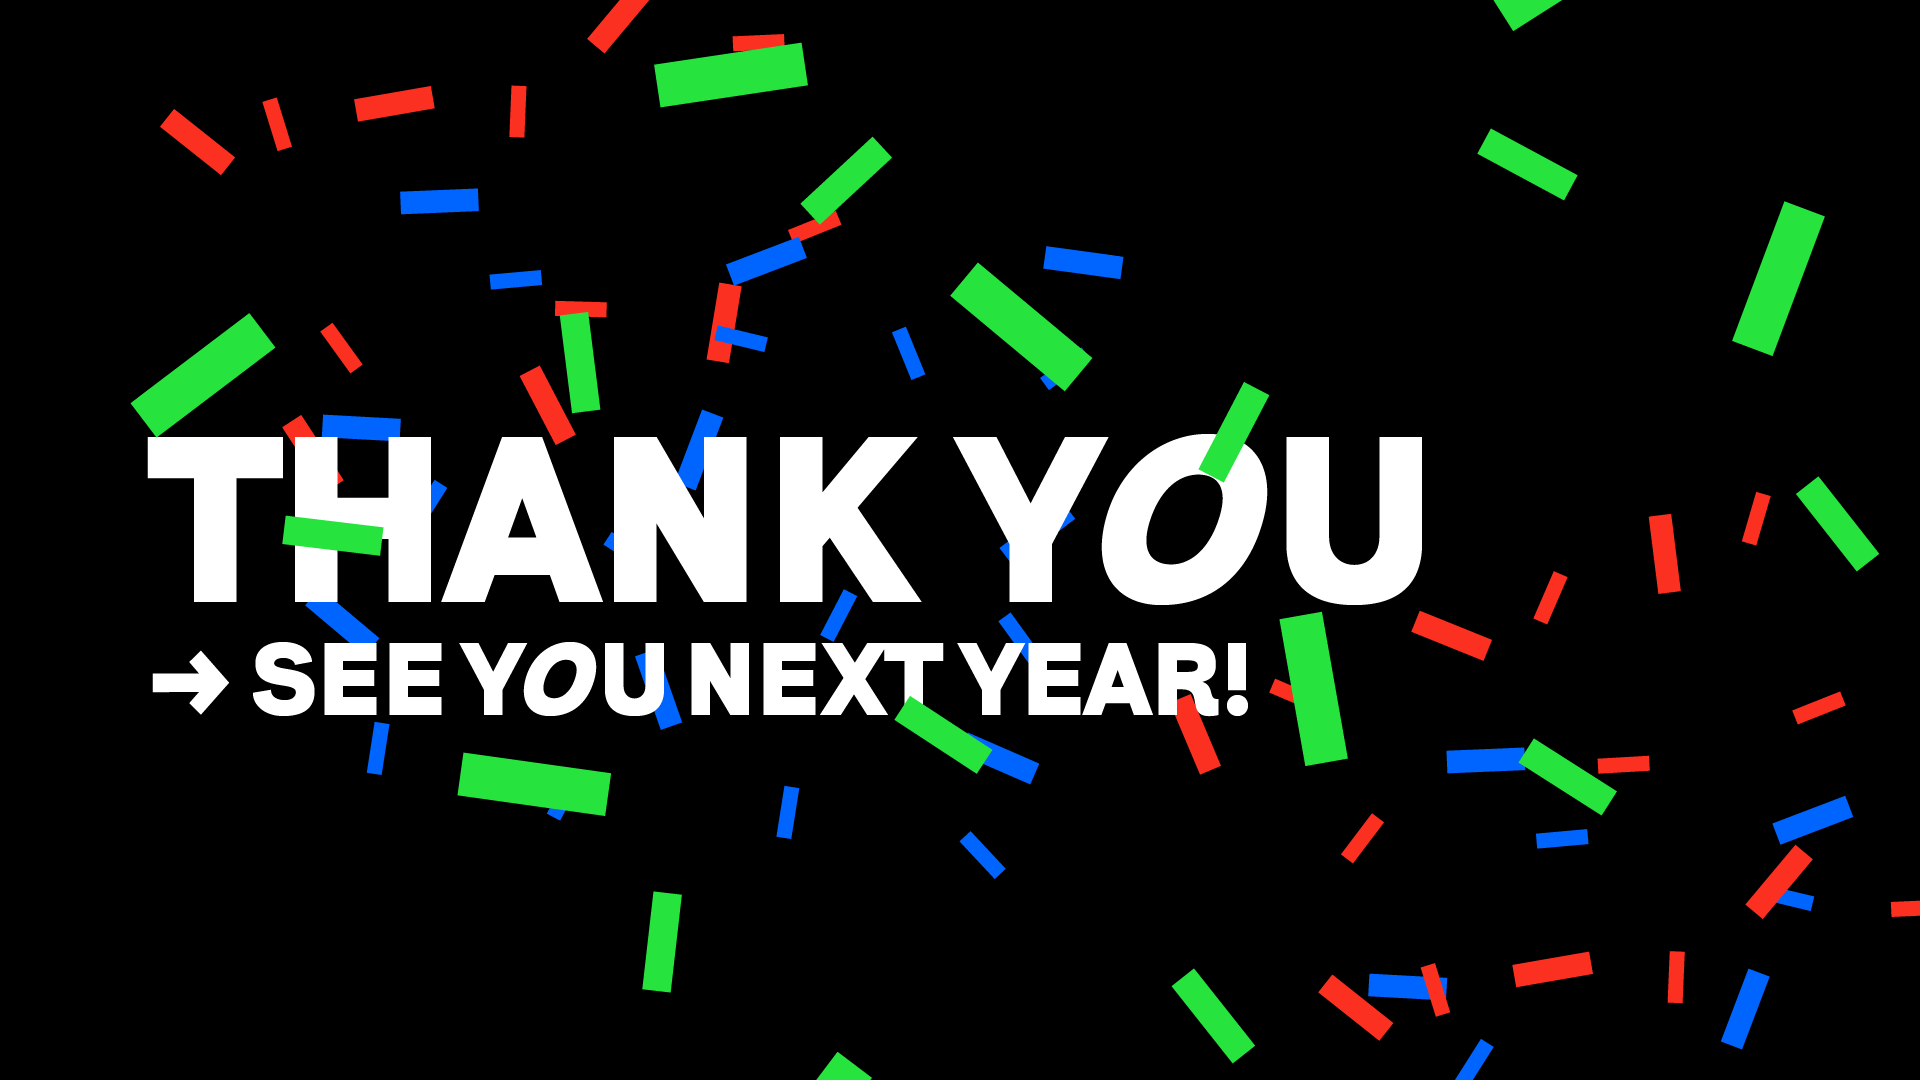 Thank You - See you next year!